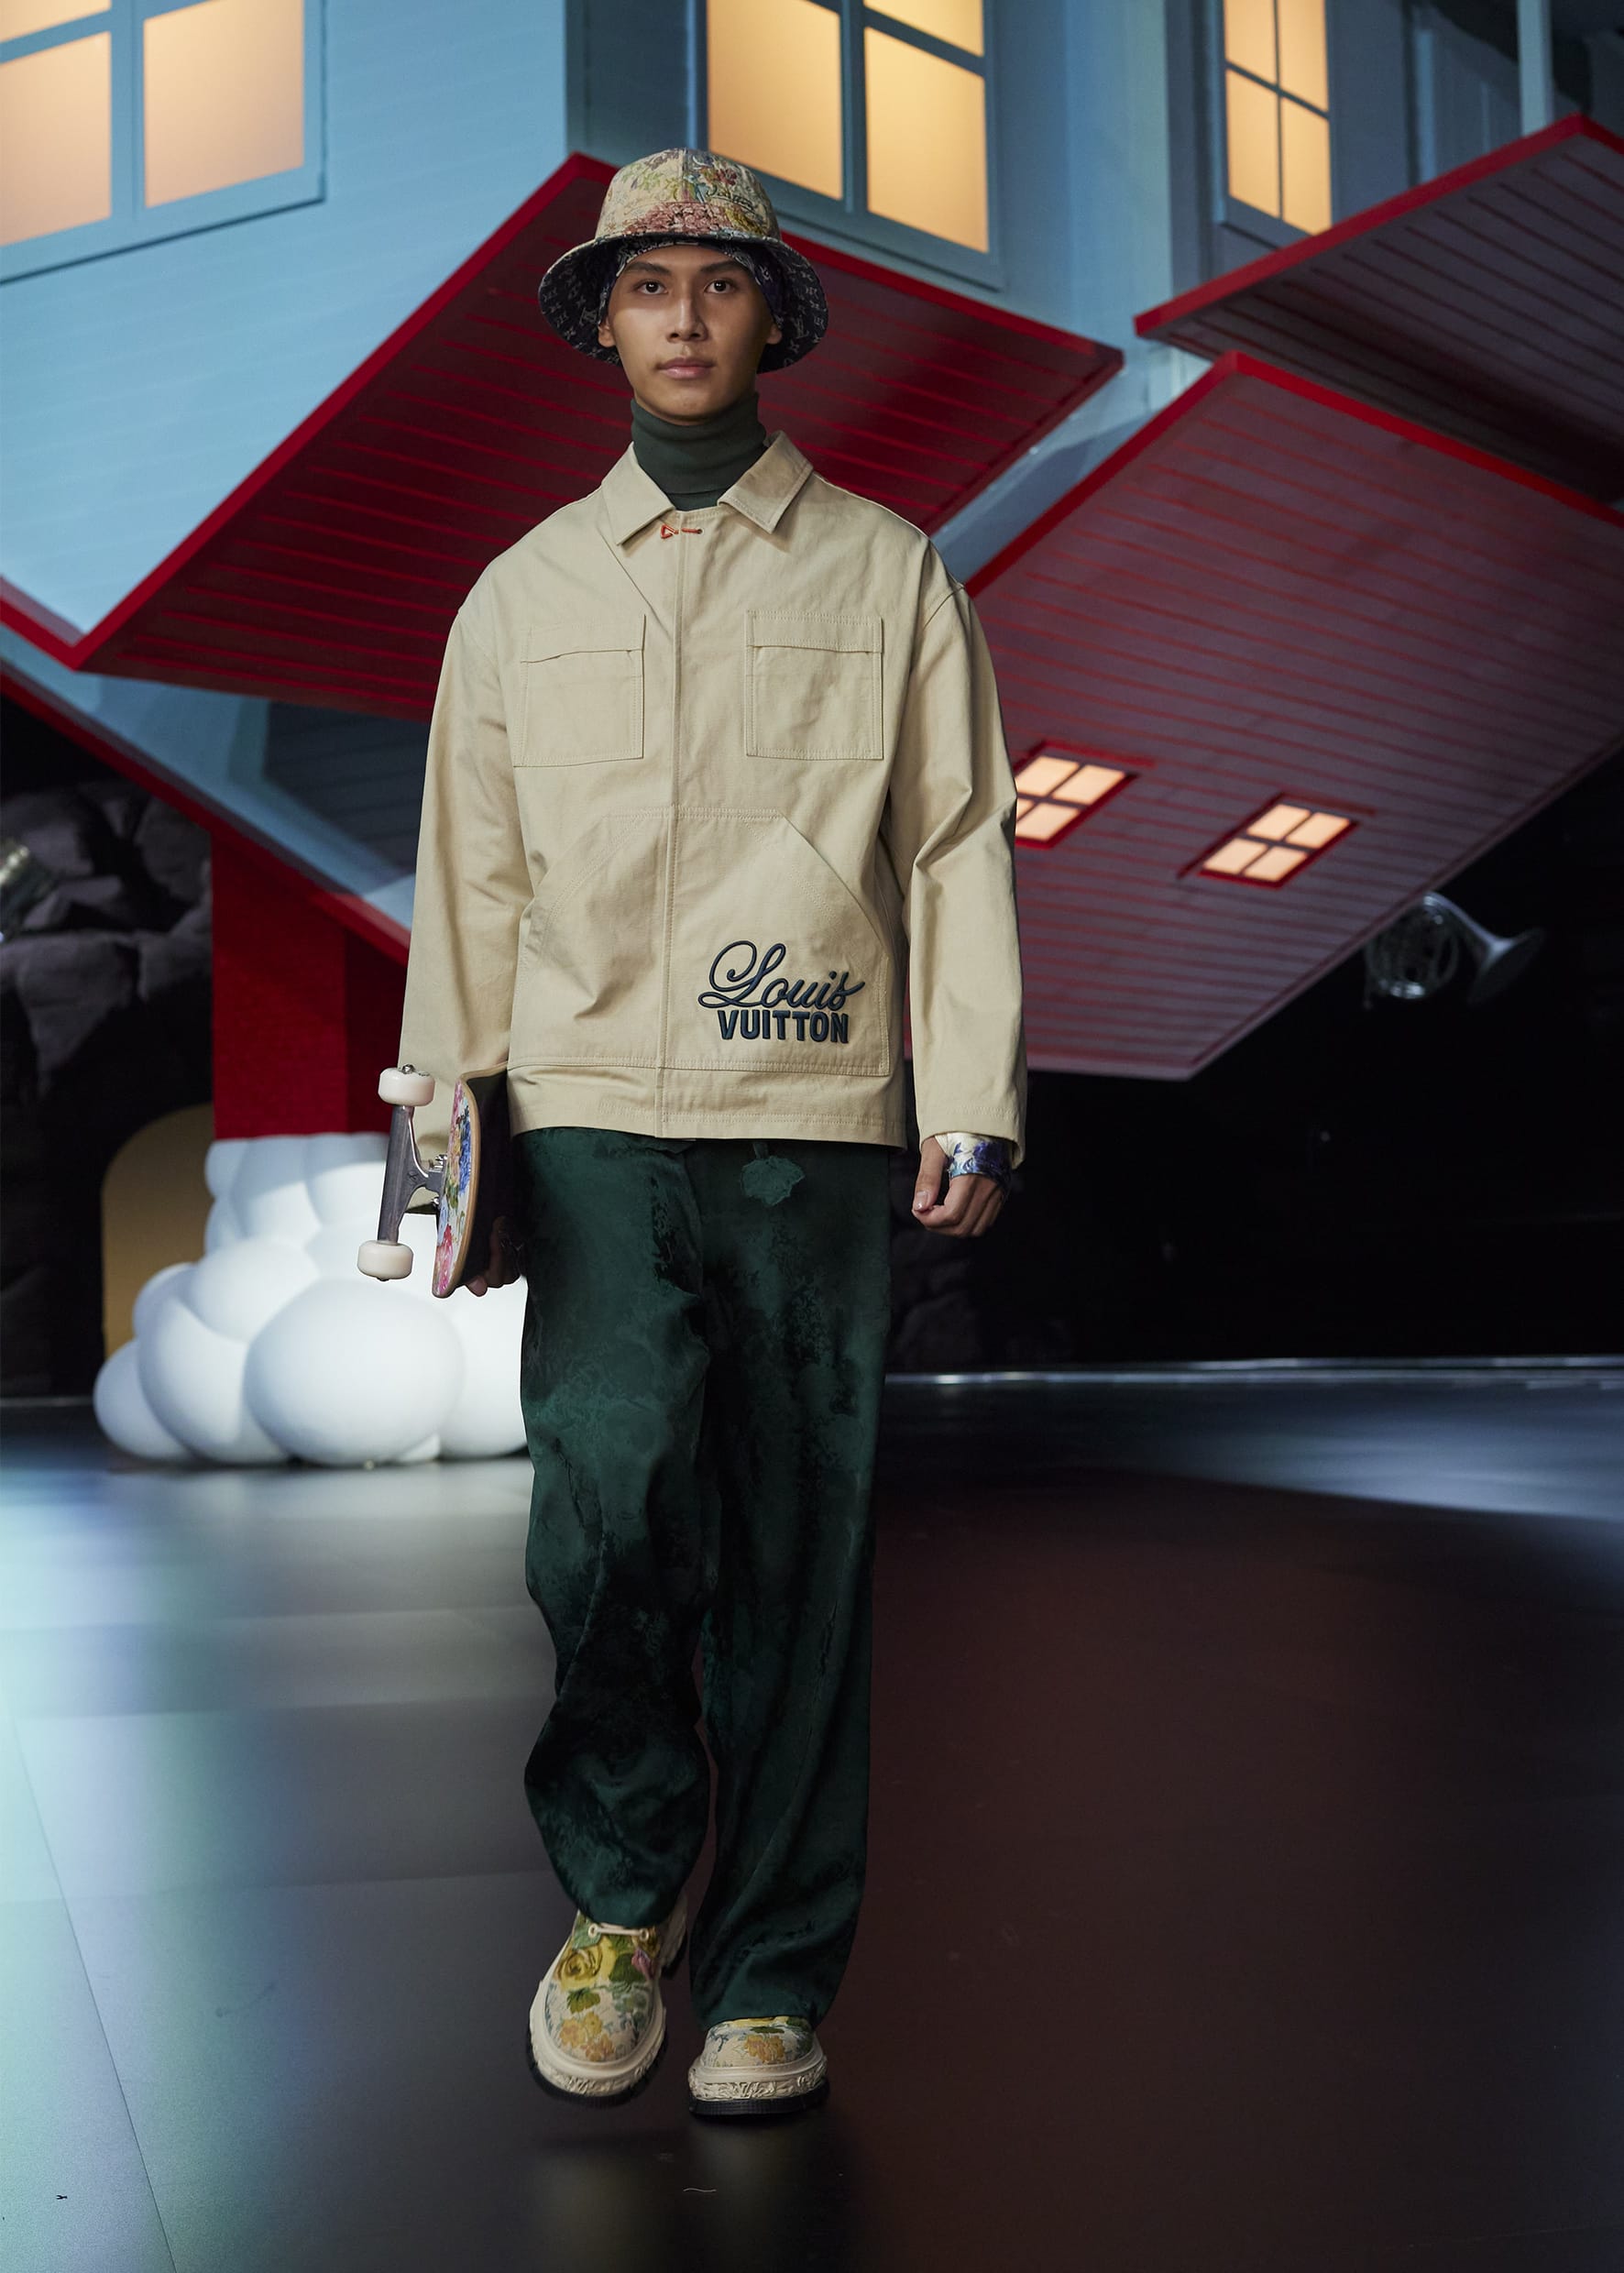 LOUIS VUITTON Men's Fall-Winter 2021.22 Spin-Off Collection